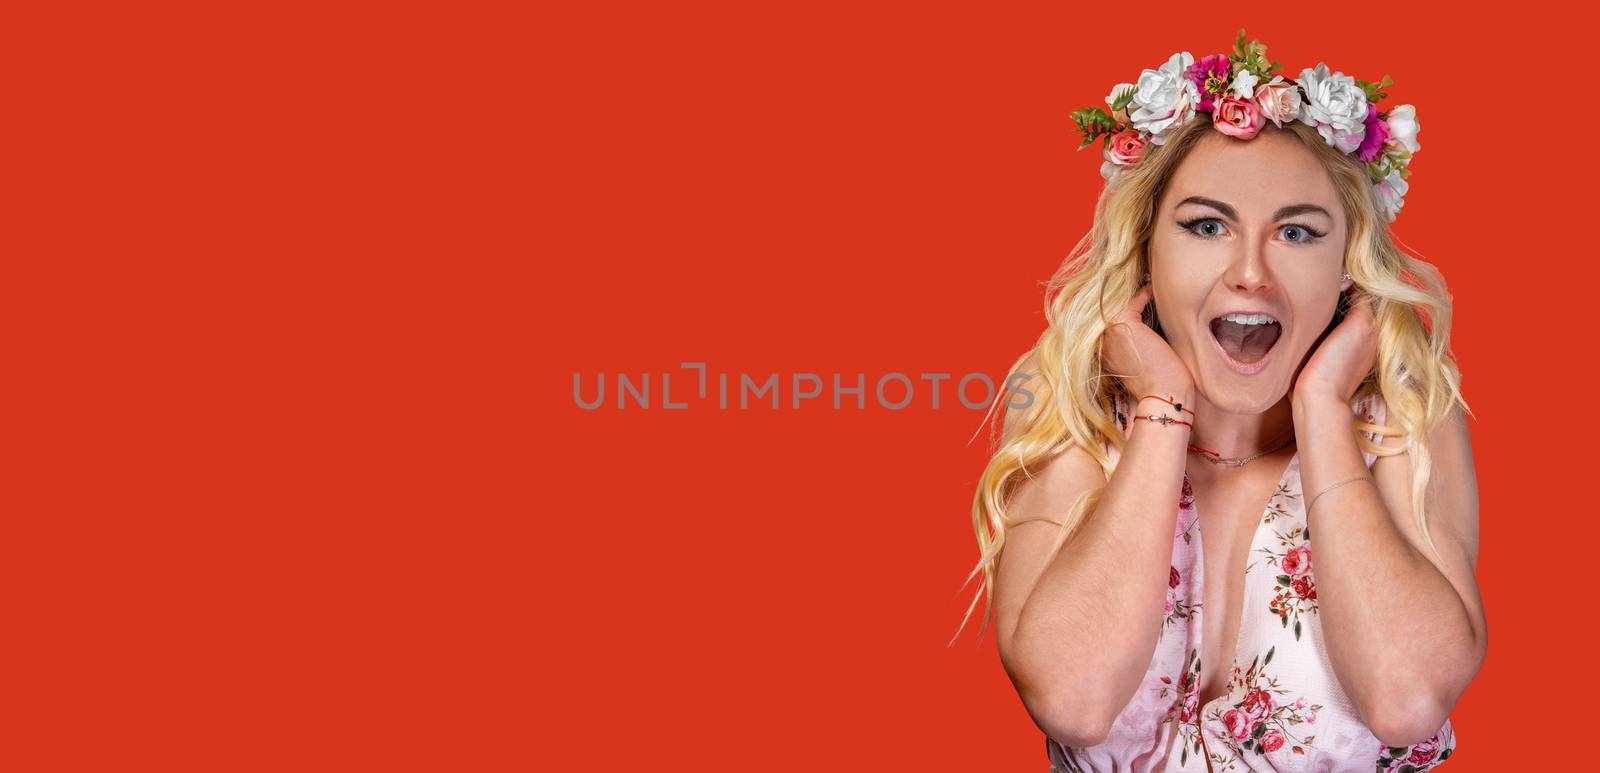 happy woman in a dress with a flower wreath on her head. Portrait on a red background. Banner with copy space.